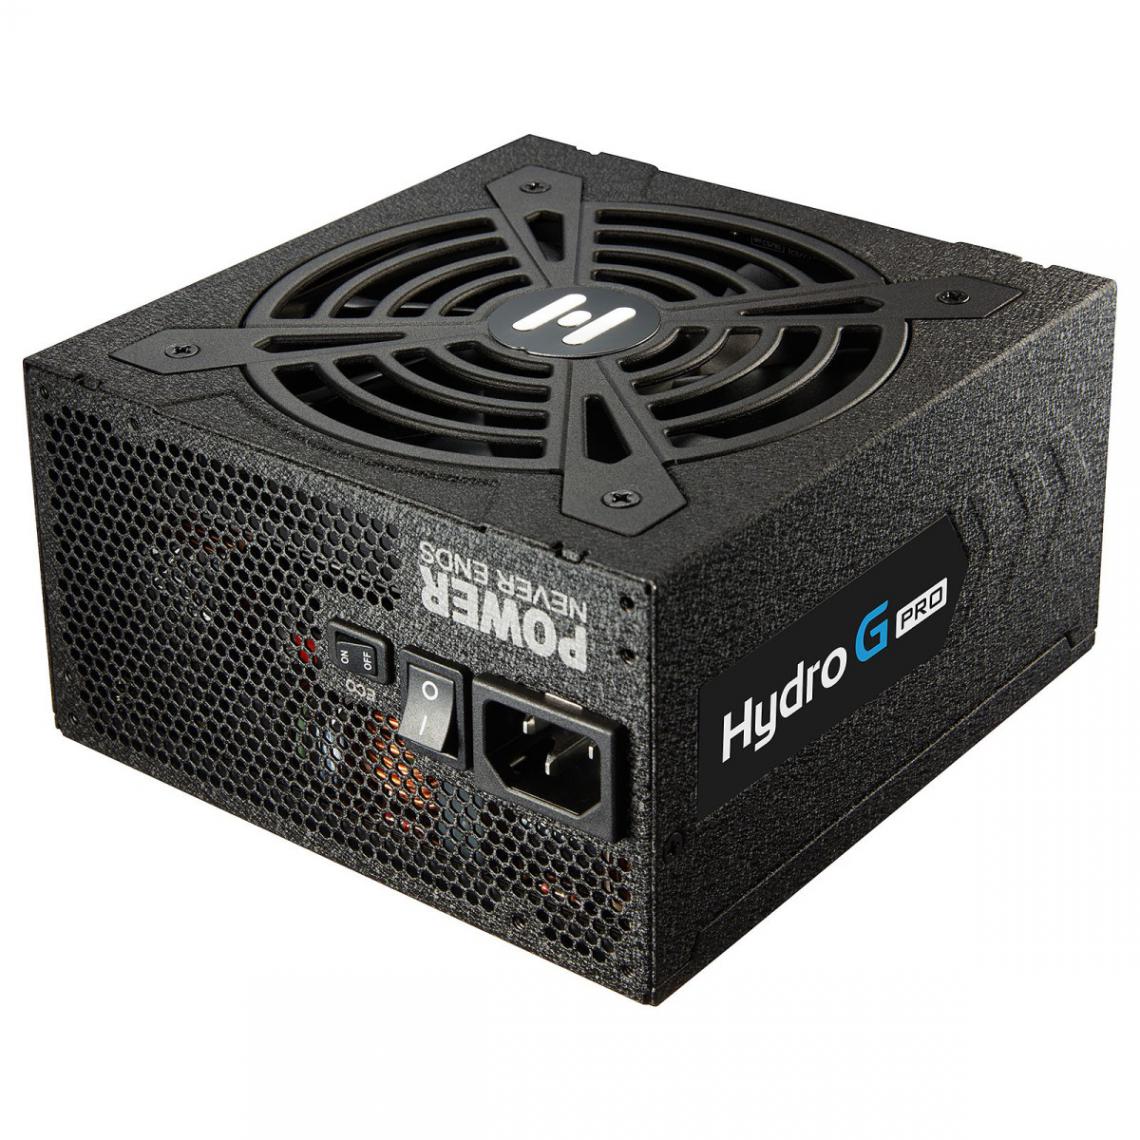 Fsp - HYDRO G PRO Gold 650W - 80+ - Alimentation modulaire